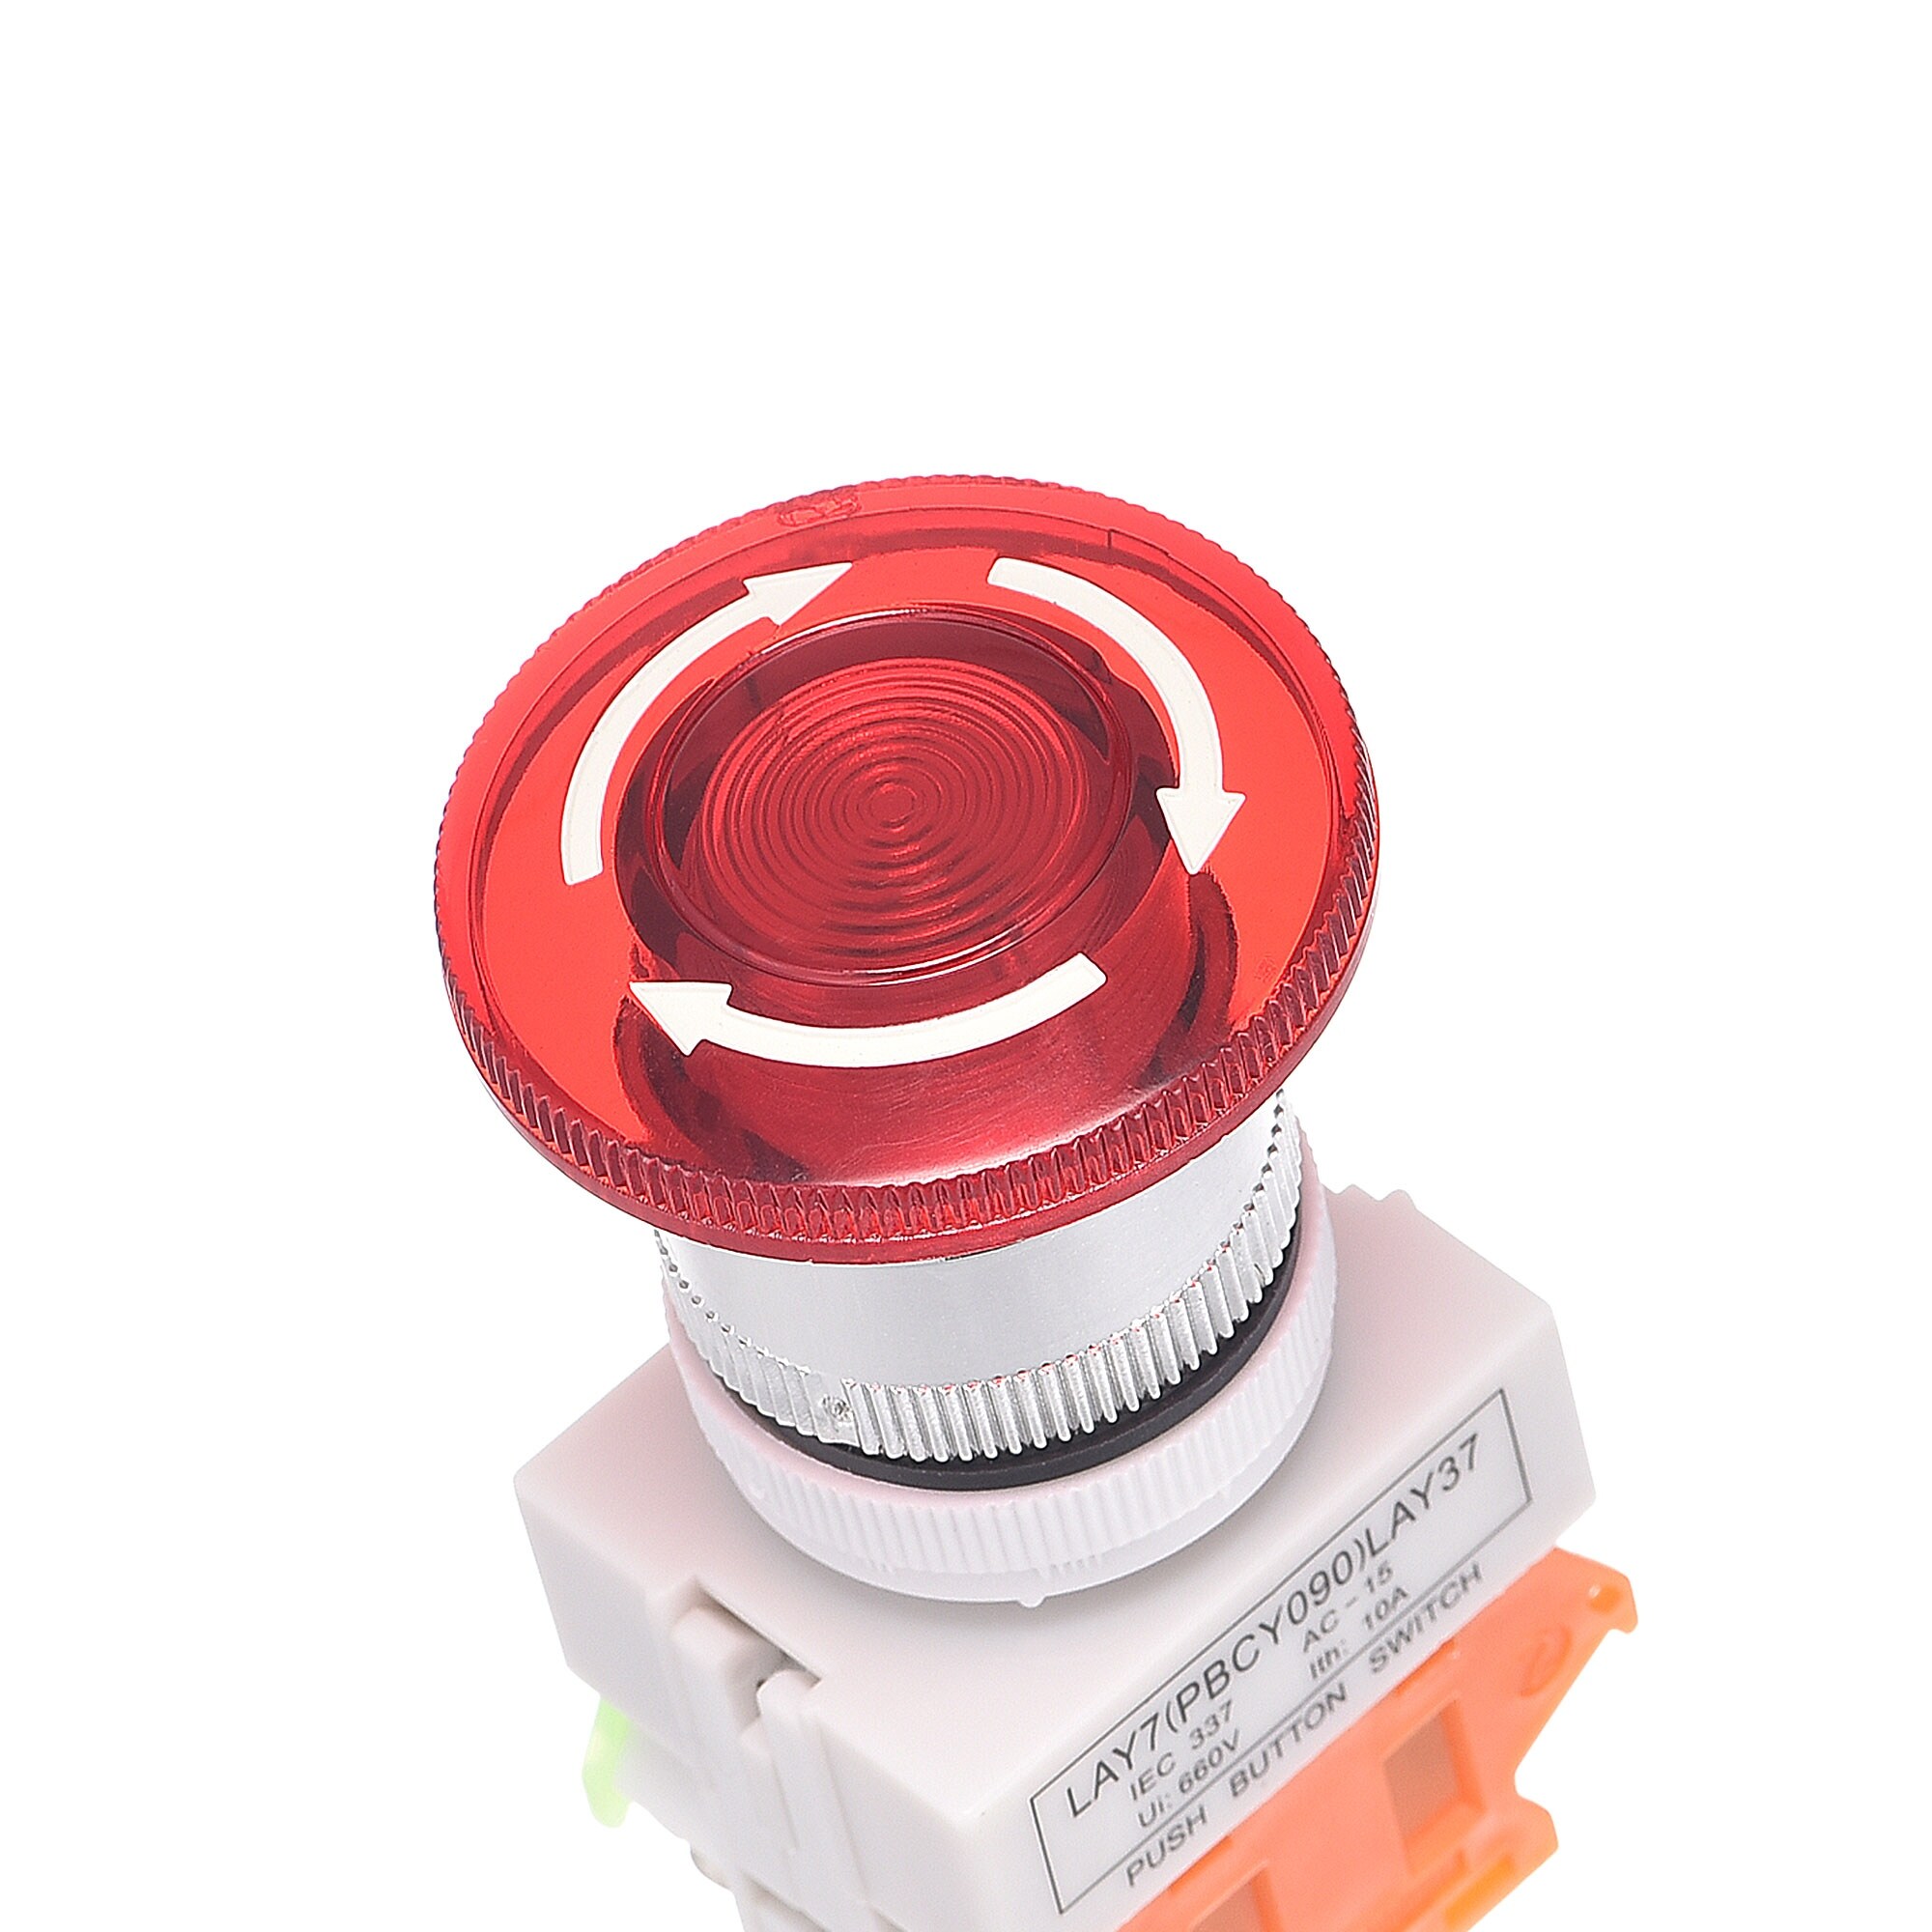 22mm Latching Emergency Stop Push Button Switch AC250V 10A W Light 24V 1NO 1NC - Red,White